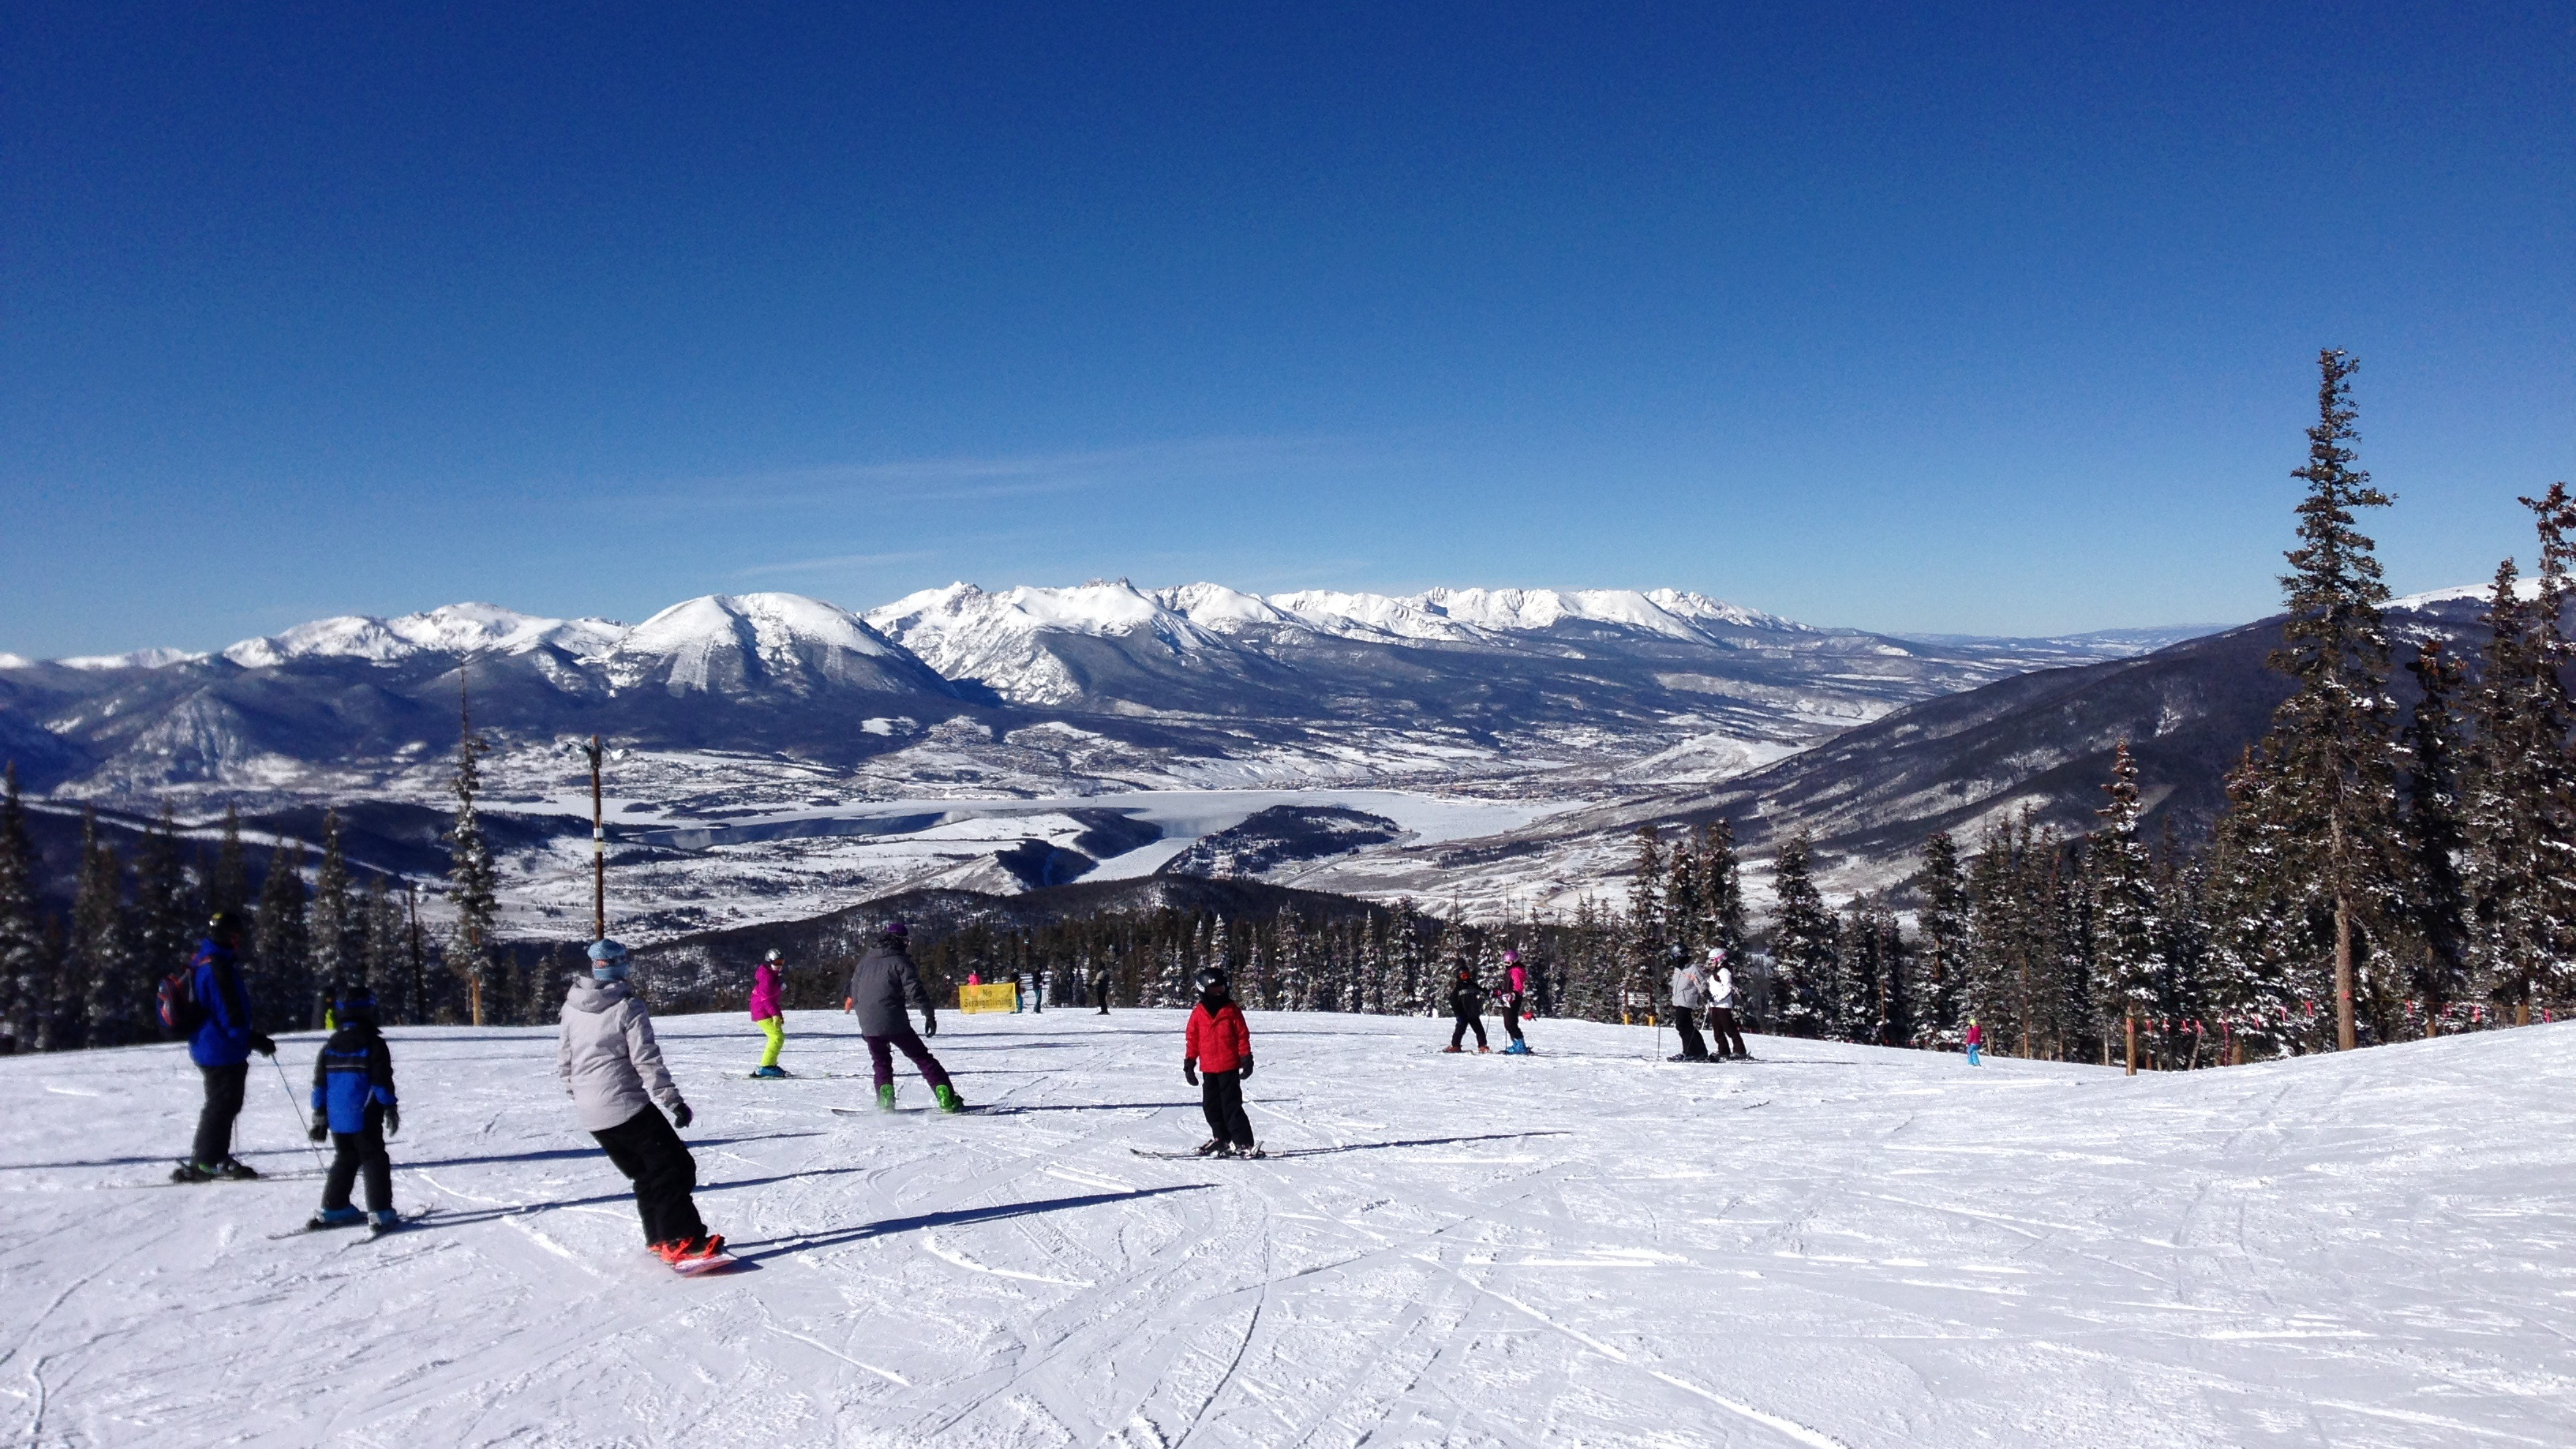 Best ski resorts in colorado for couples